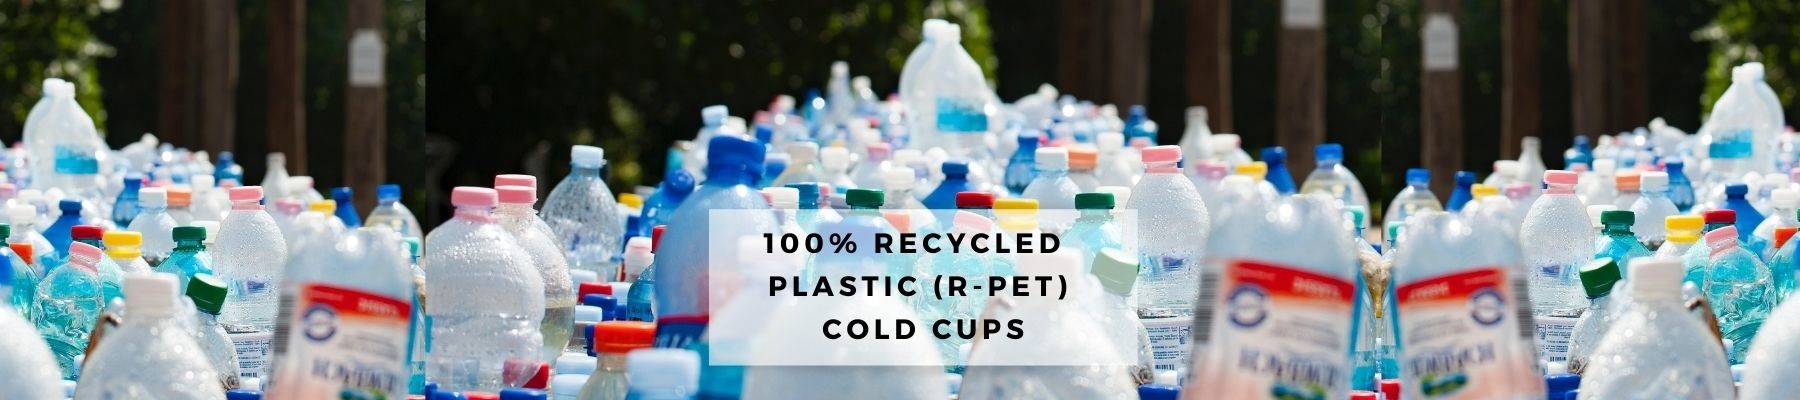 100% Recycled Plastic Glasses - PET (r-Pet) Cold Plastic Cups